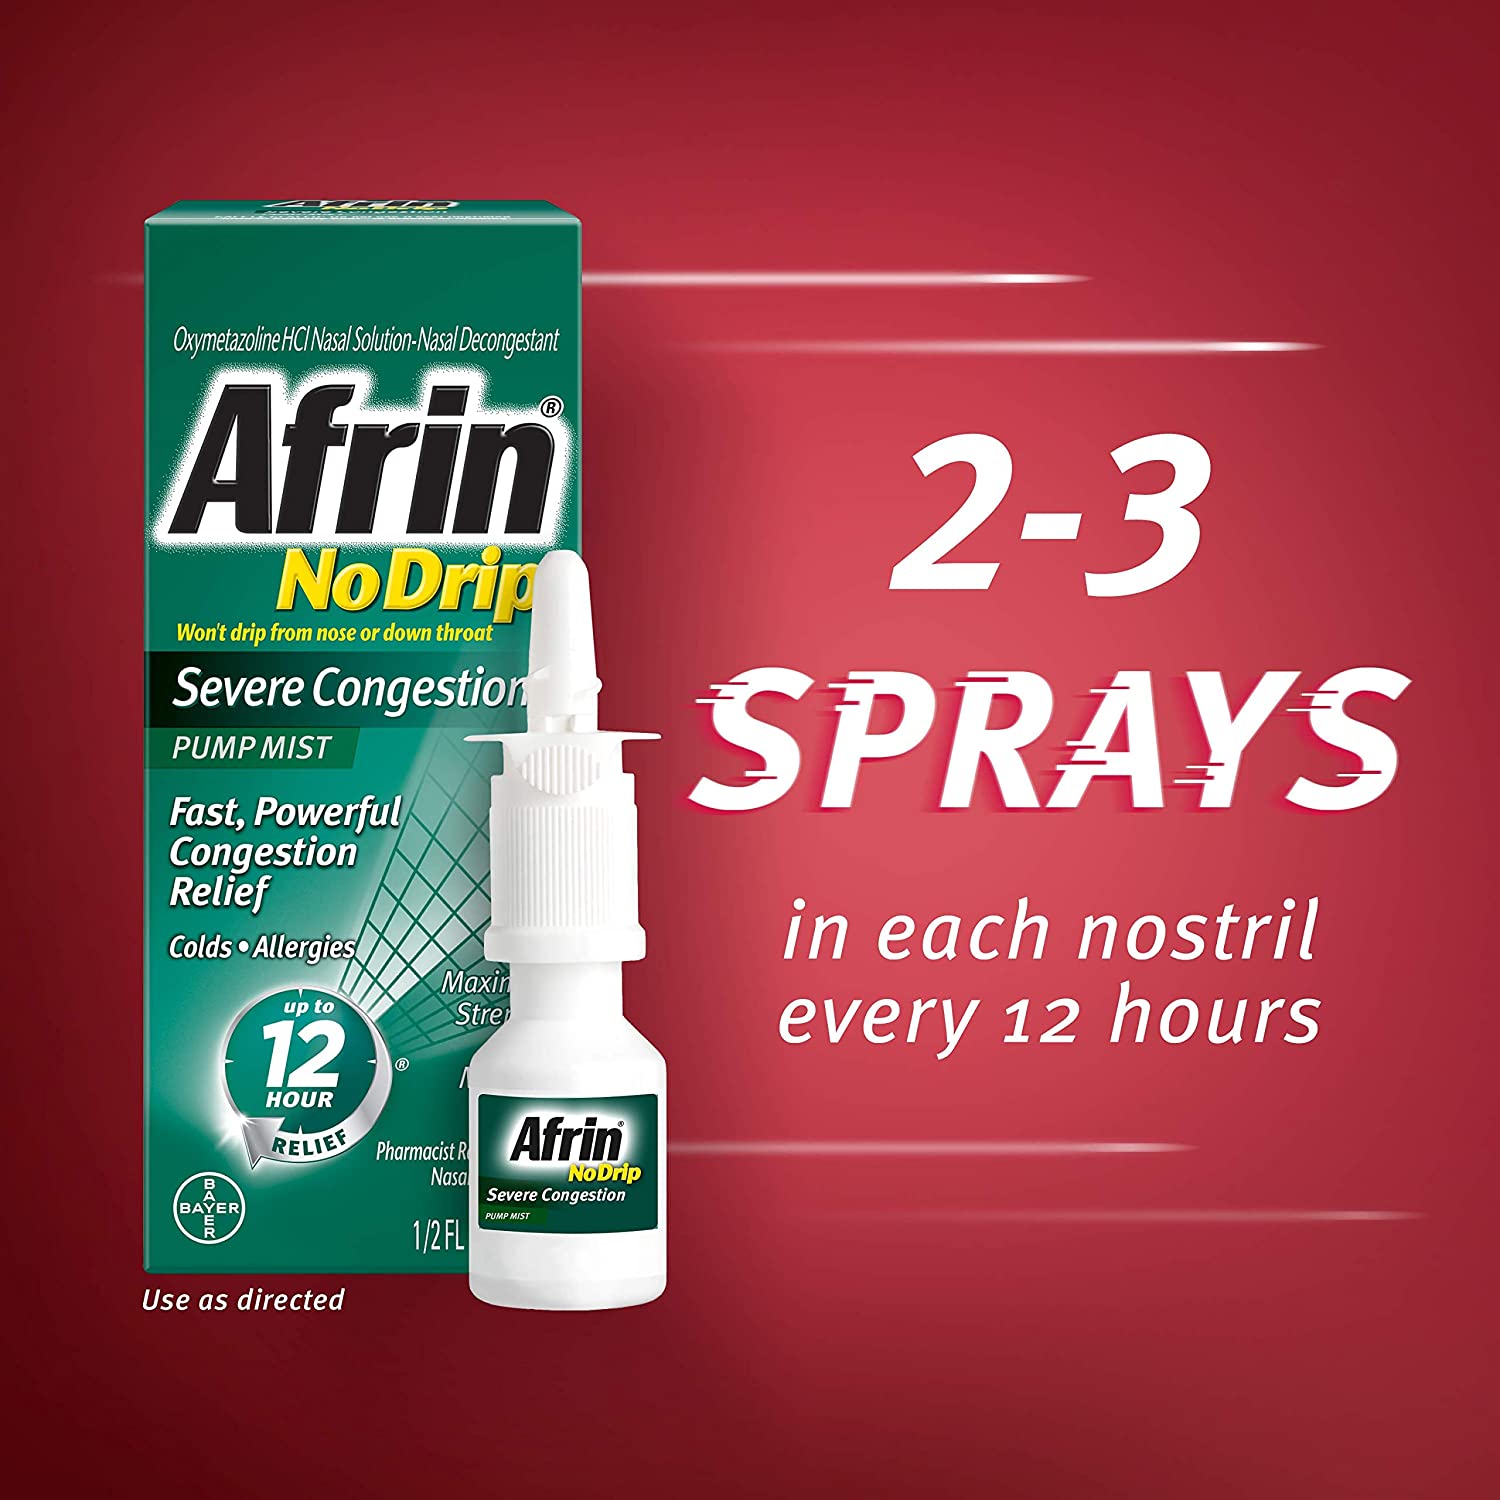 Twin Pack Afrin, two 15ml Bottles